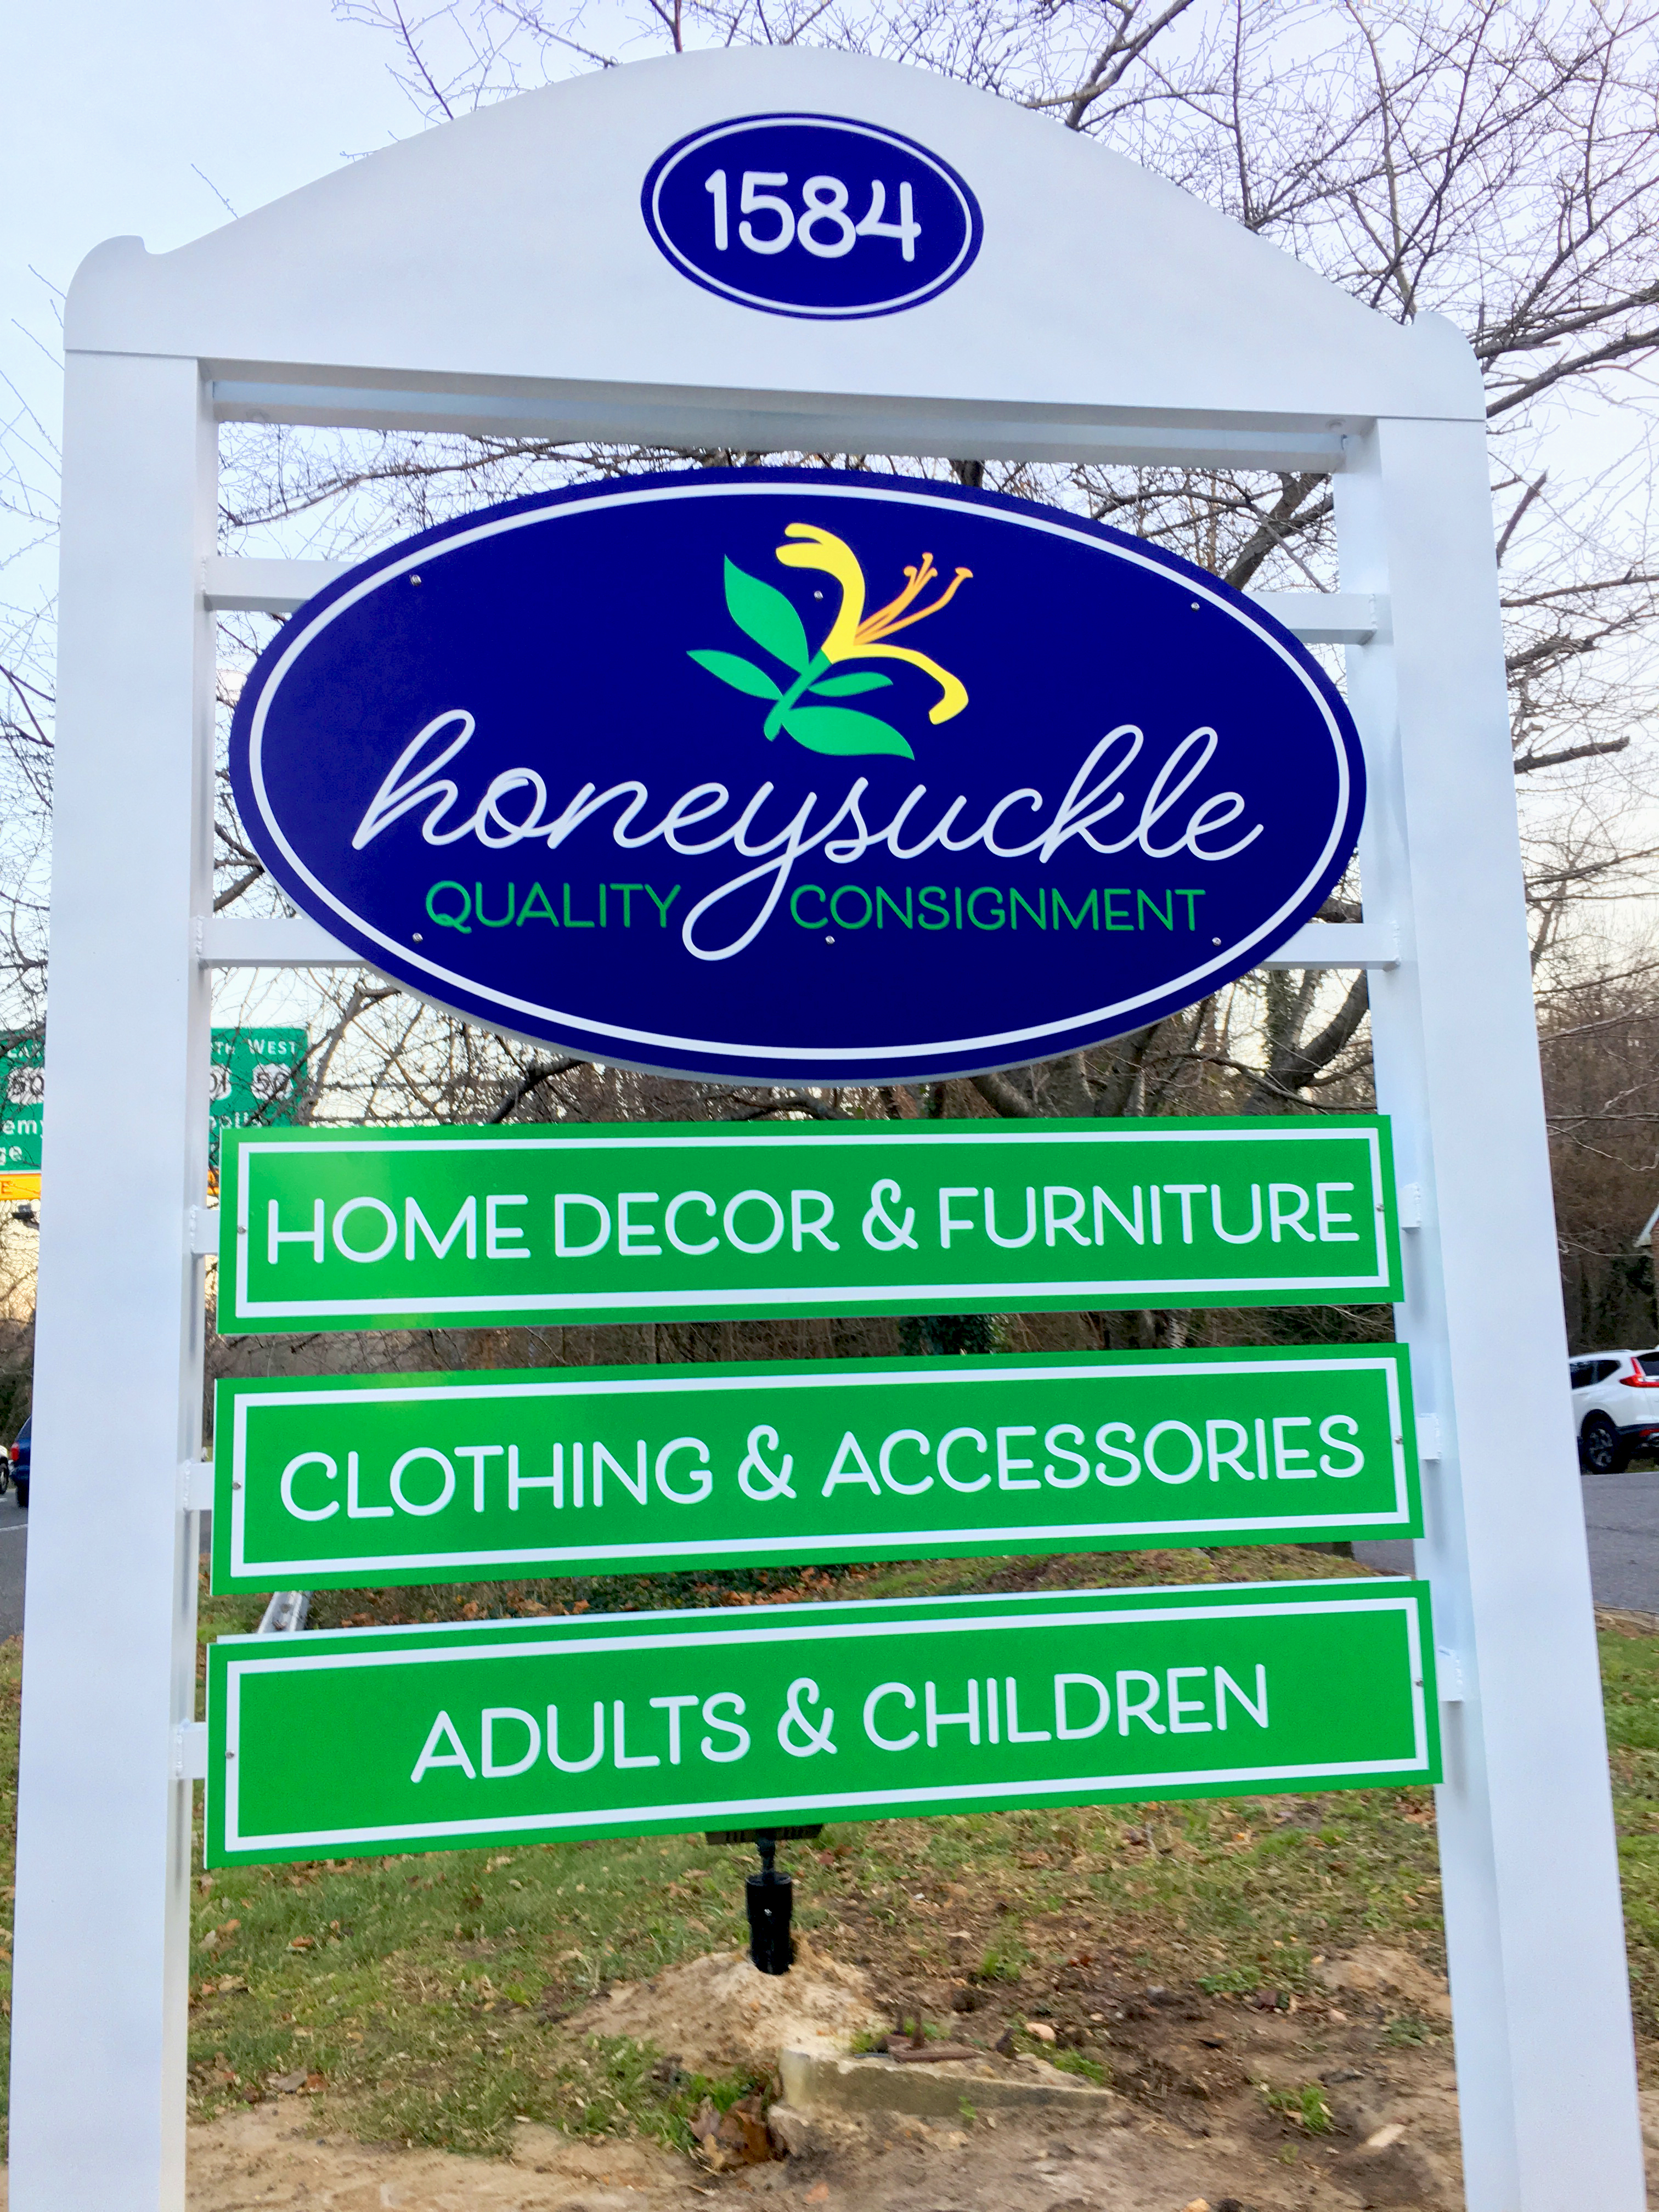 Honeysuckle Quality Consignment Highway Sign